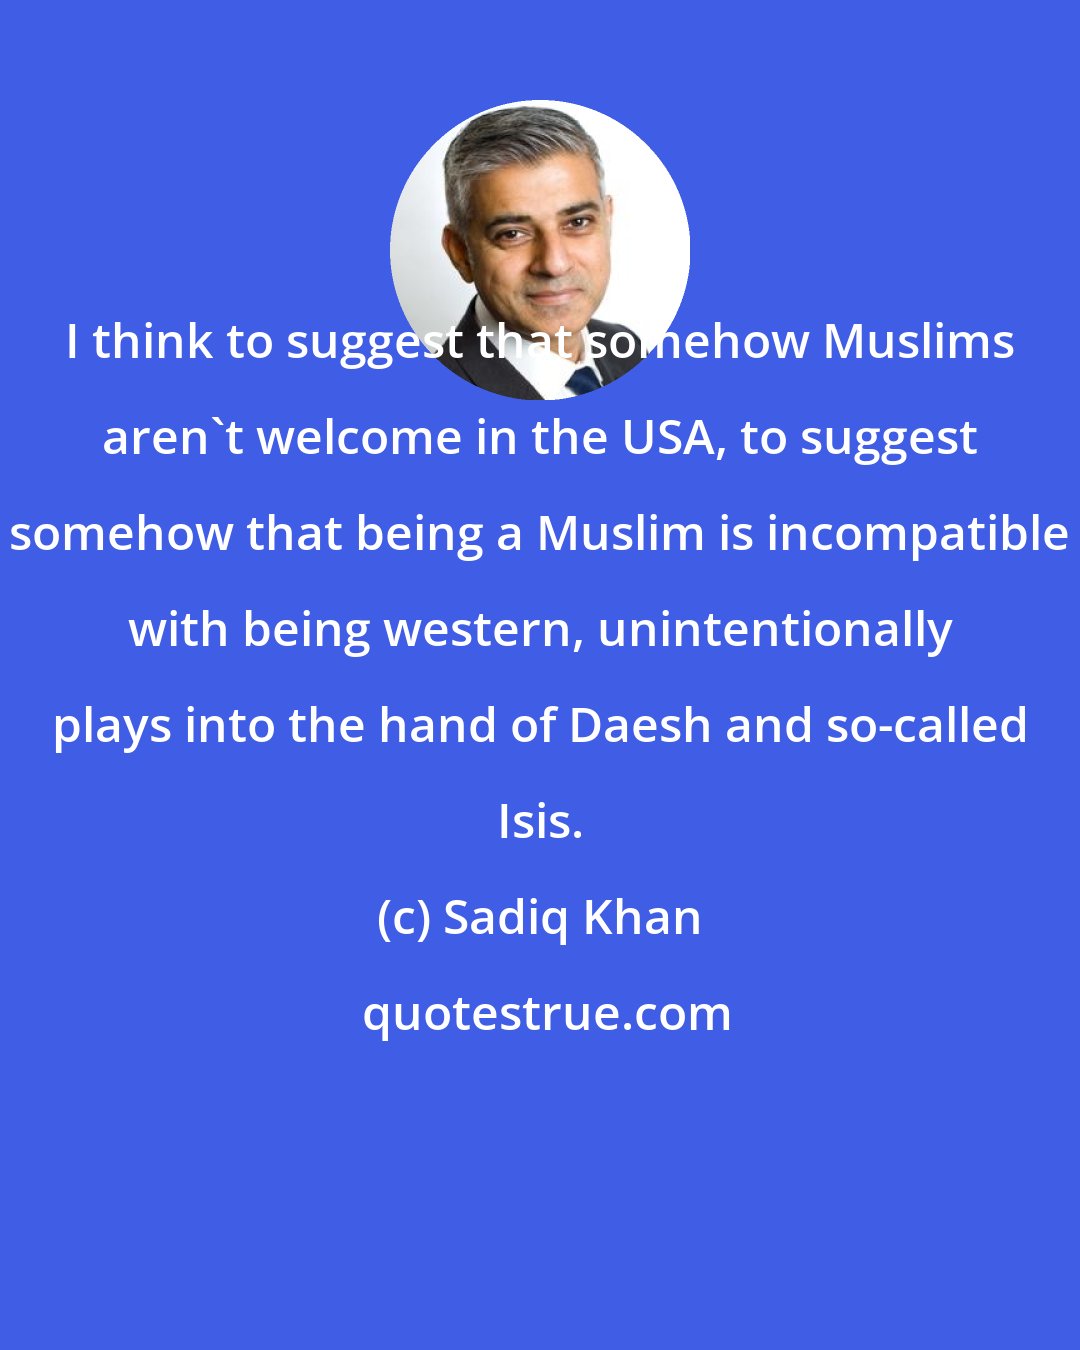 Sadiq Khan: I think to suggest that somehow Muslims aren't welcome in the USA, to suggest somehow that being a Muslim is incompatible with being western, unintentionally plays into the hand of Daesh and so-called Isis.